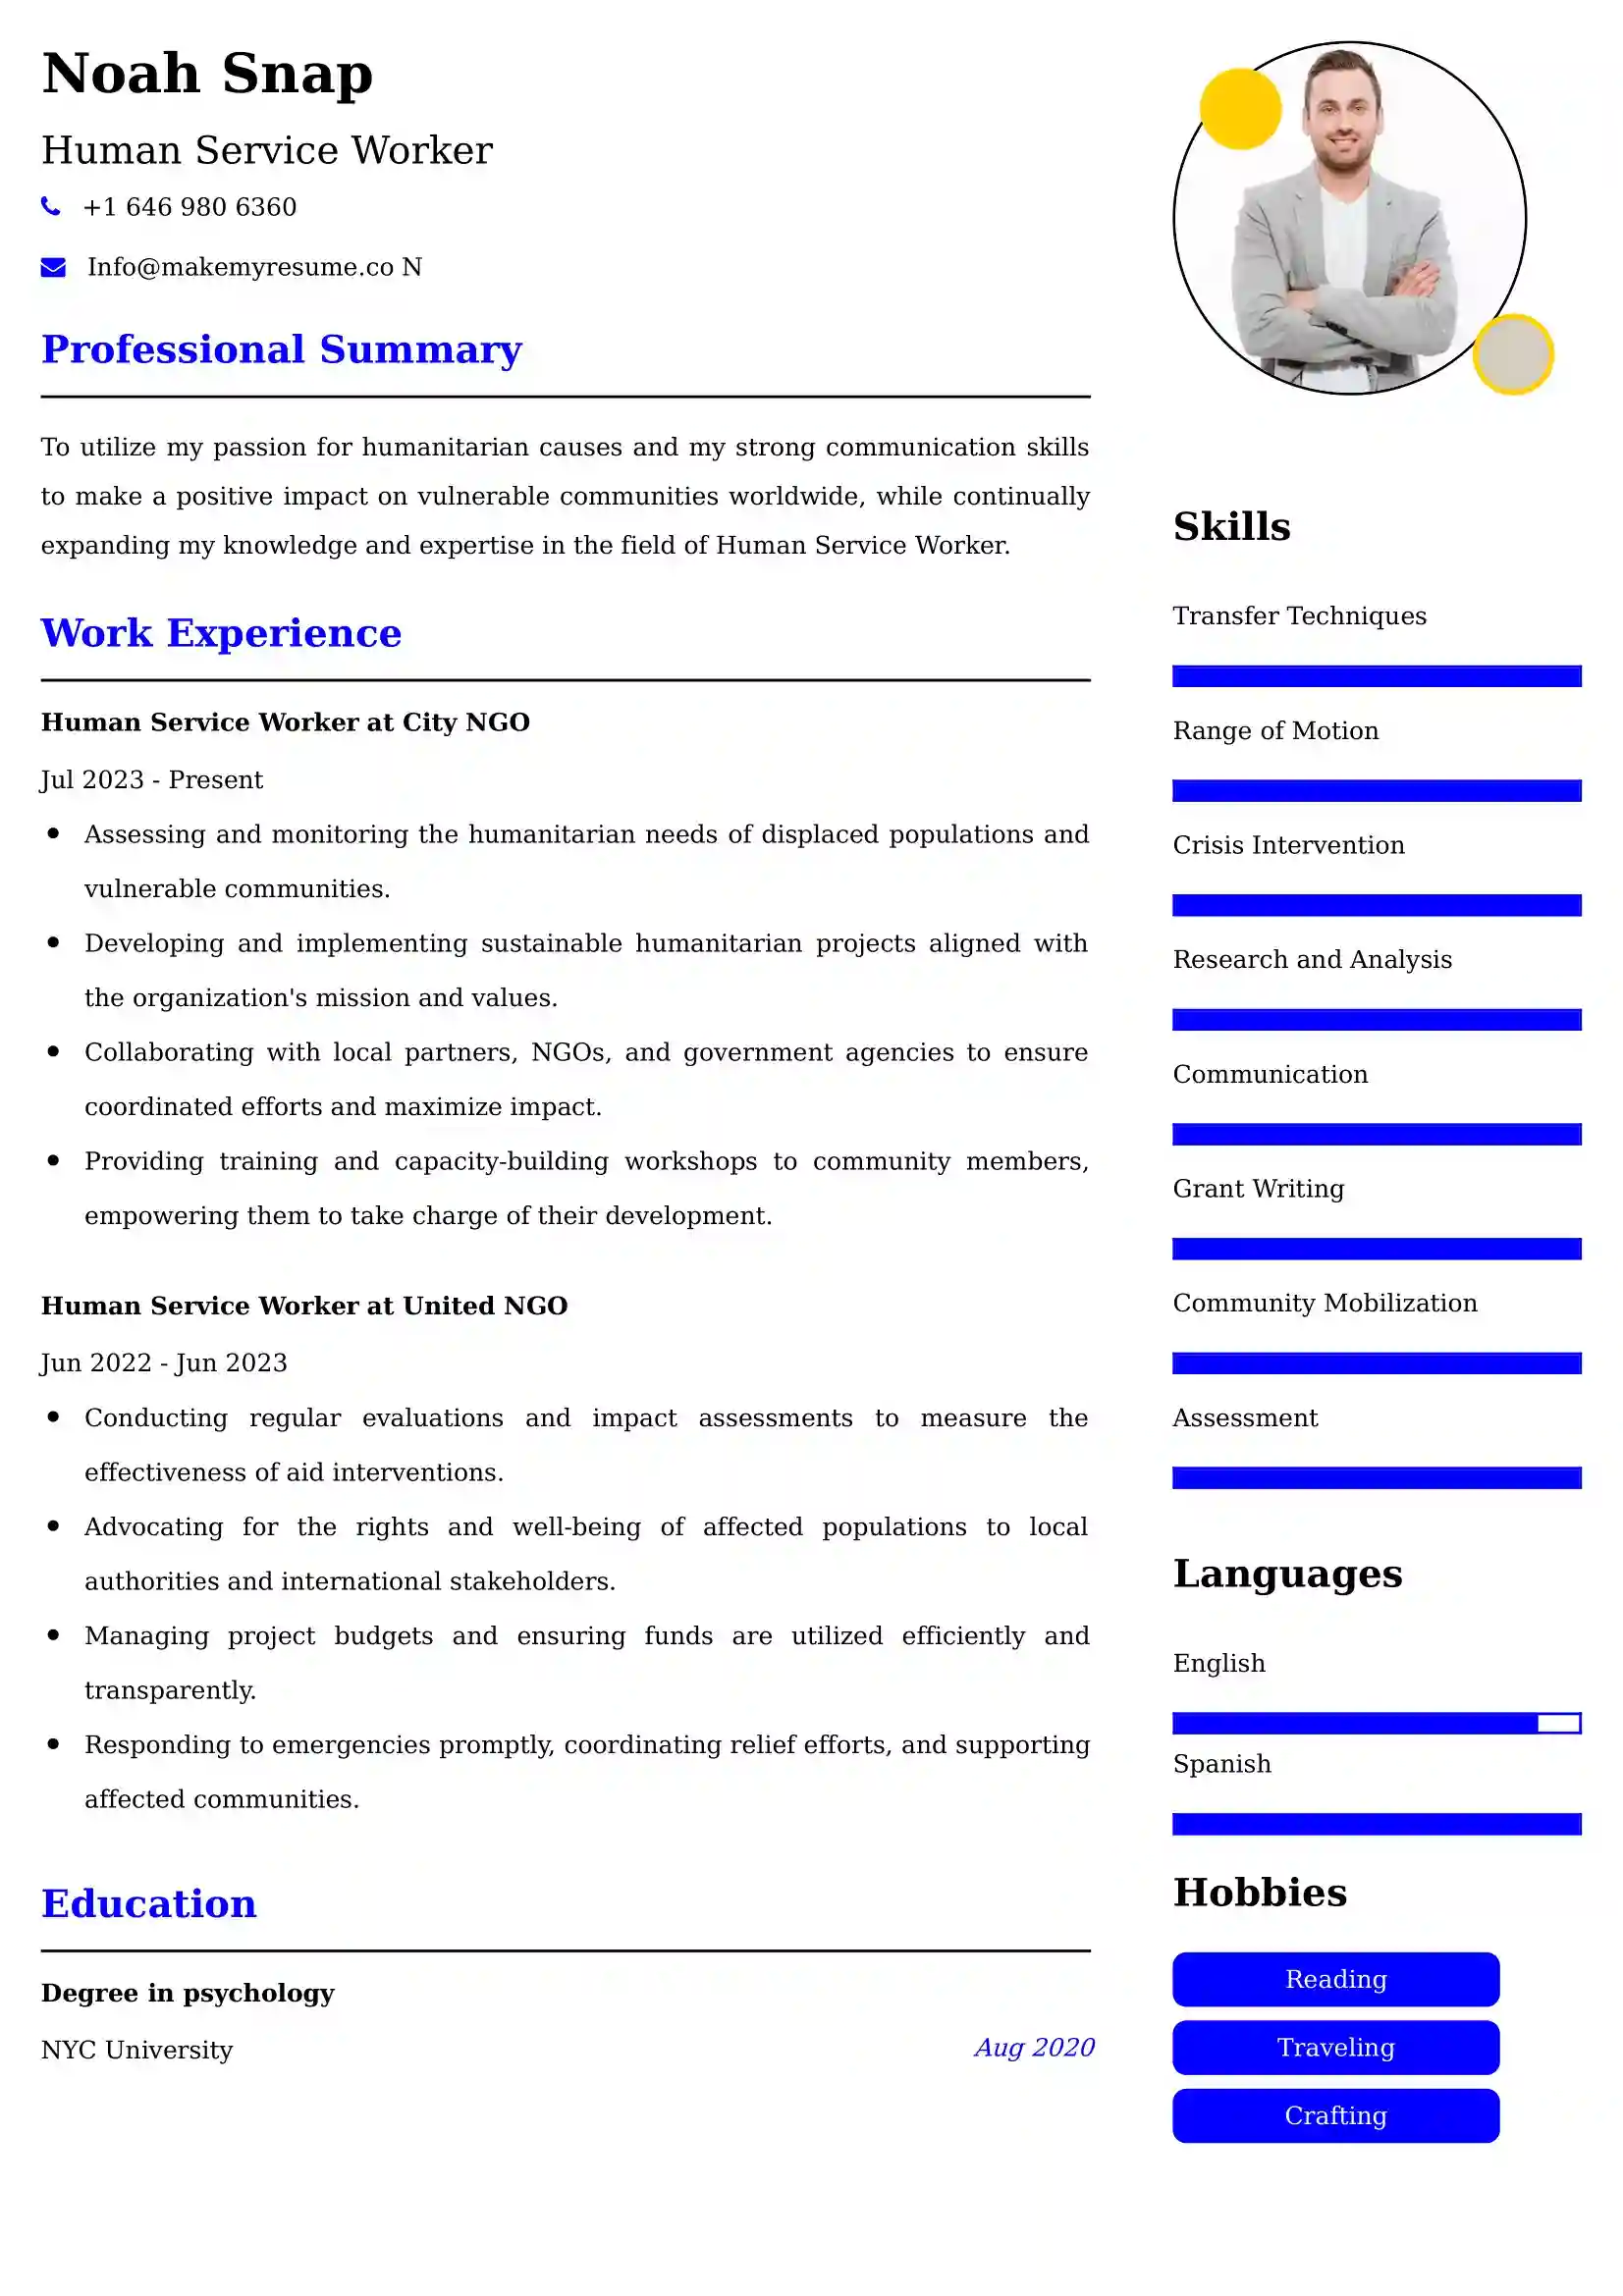 Human Service Worker Resume Examples - Australian Format and Tips